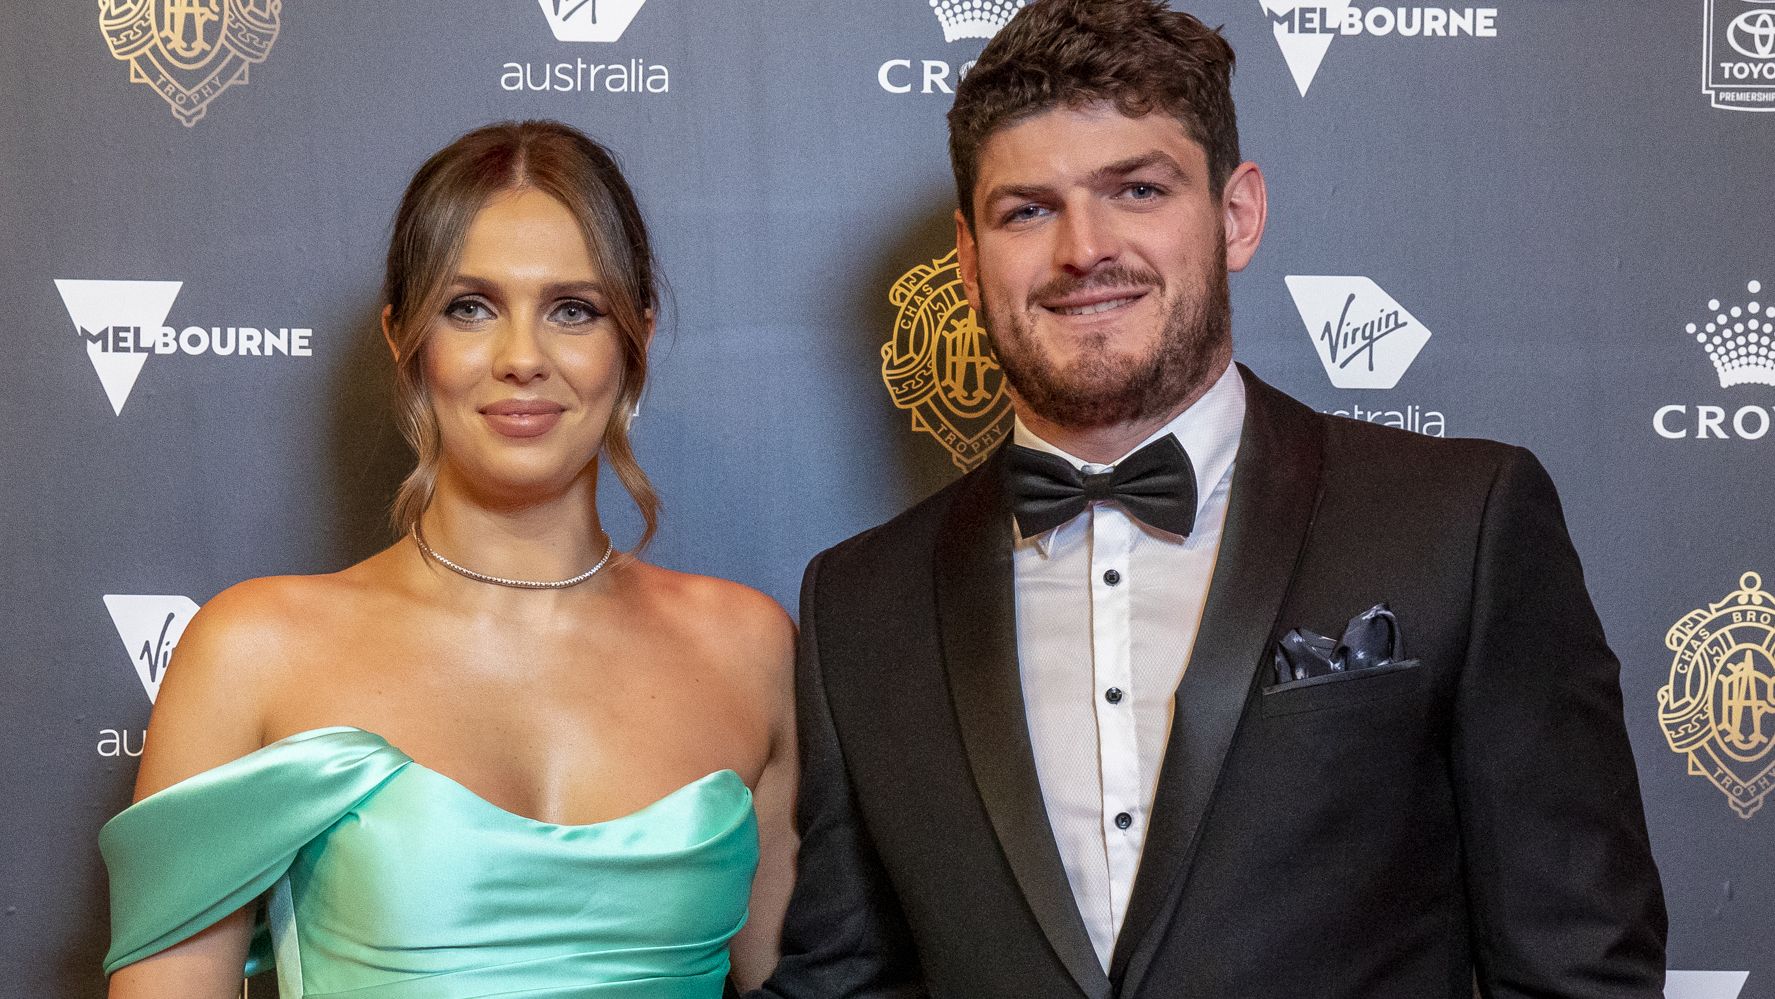 MELBOURNE, AUSTRALIA - SEPTEMBER 18: Danielle Frawley and Angus Brayshaw attend the 2022 Brownlow Medal at Crown Entertainment Complex on September 18, 2022 in Melbourne, Australia. (Photo by Sam Tabone/WireImage)